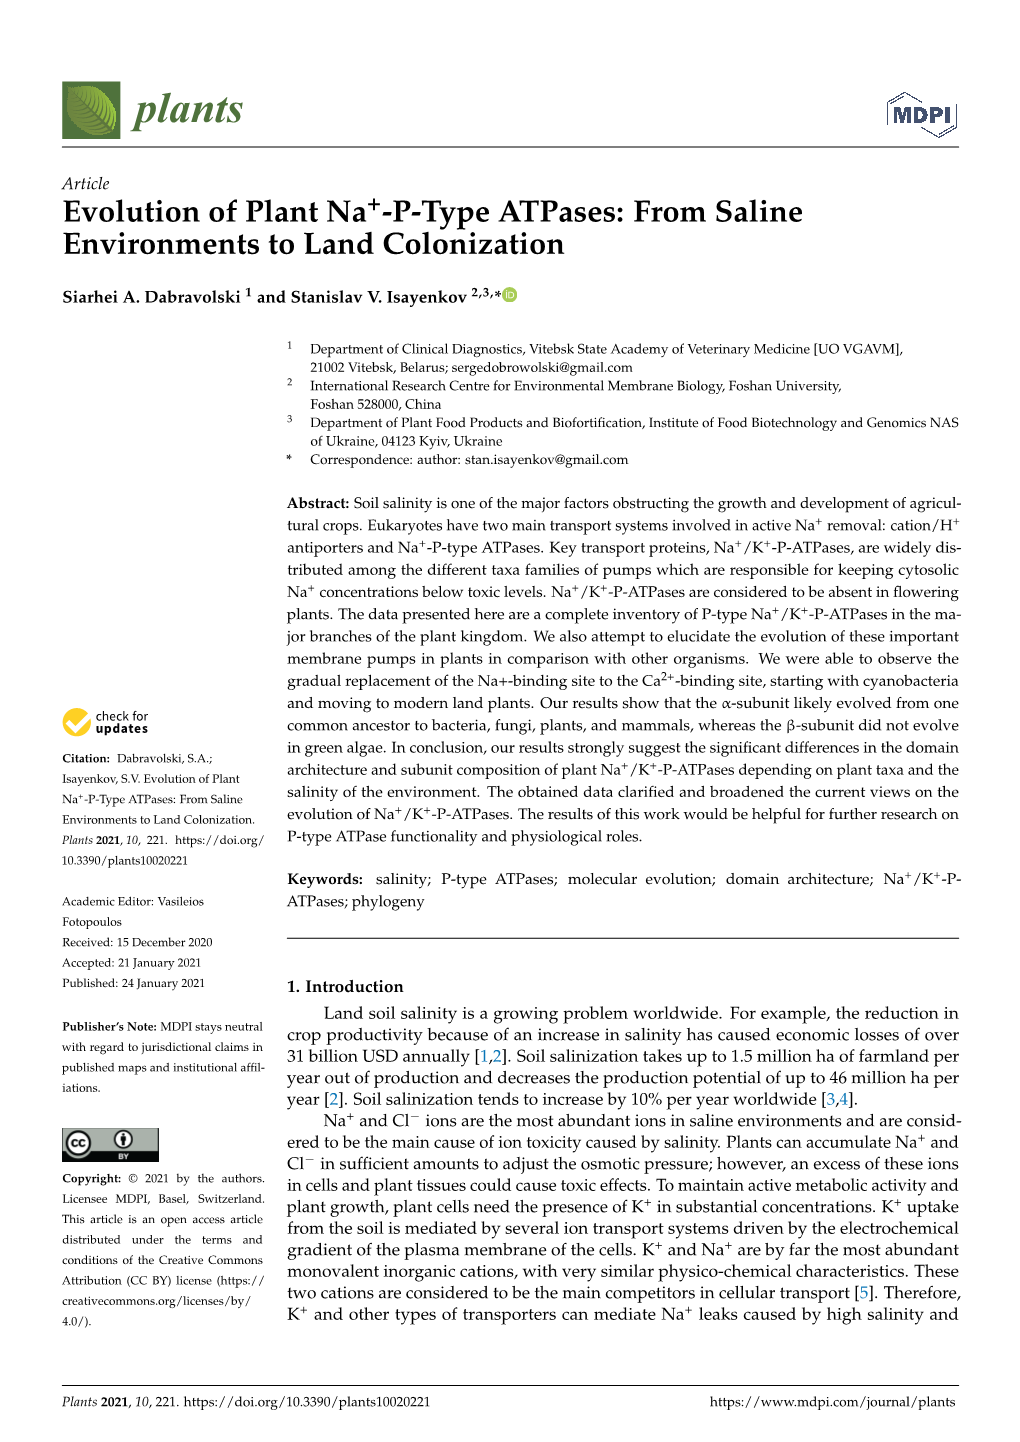 Evolution of Plant Na+-P-Type Atpases: from Saline Environments to Land Colonization